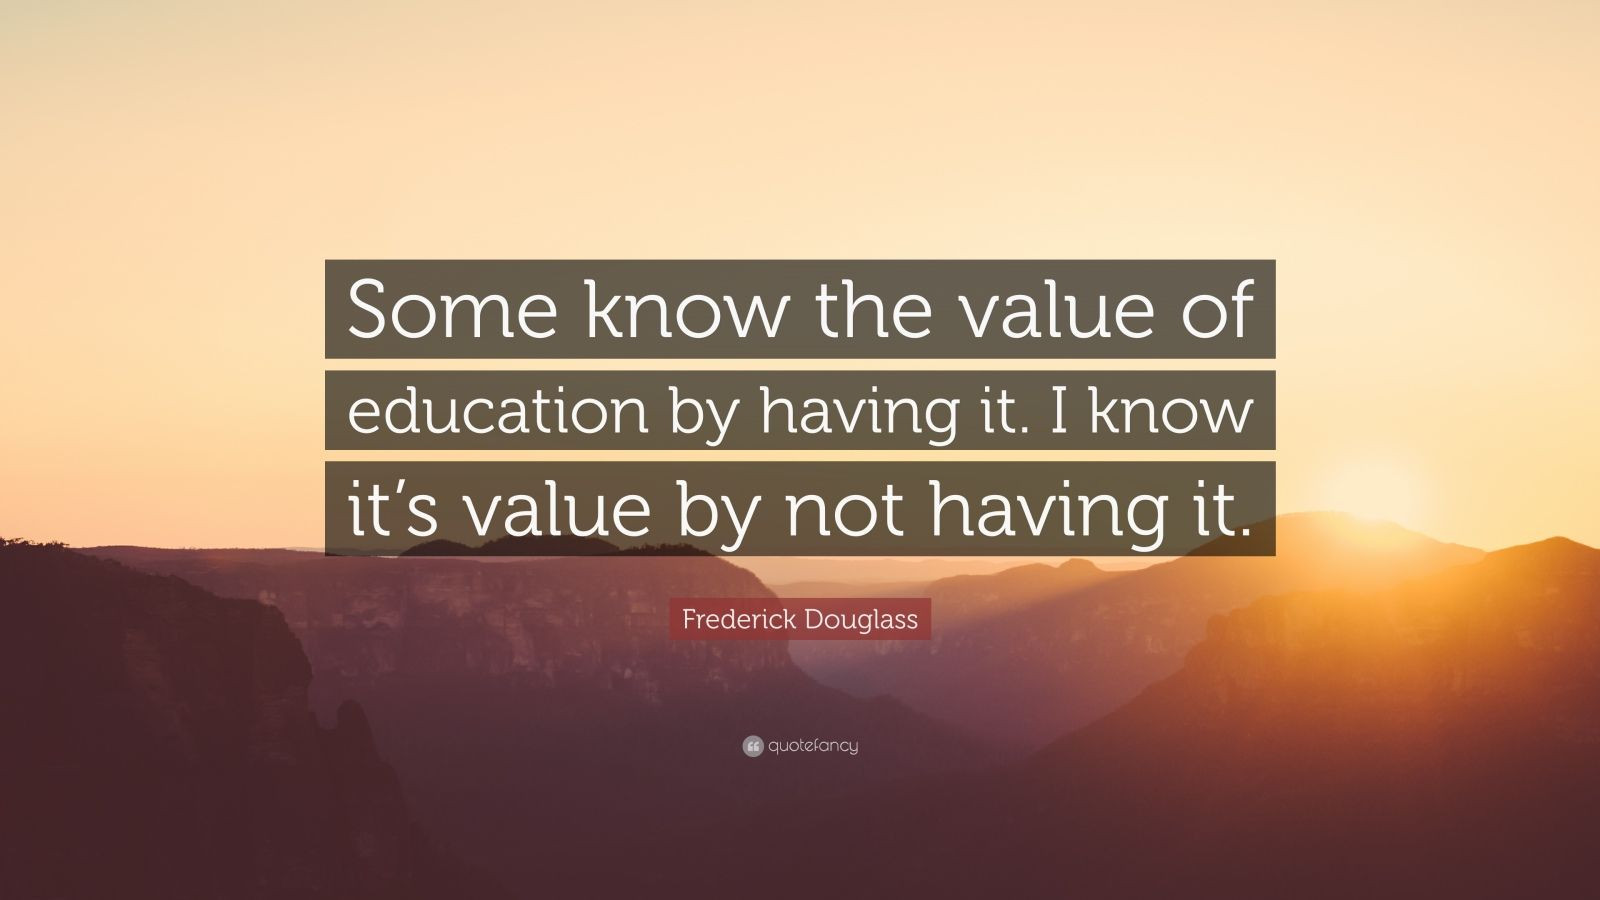 Value Of Education Quote
 Frederick Douglass Quote “Some know the value of